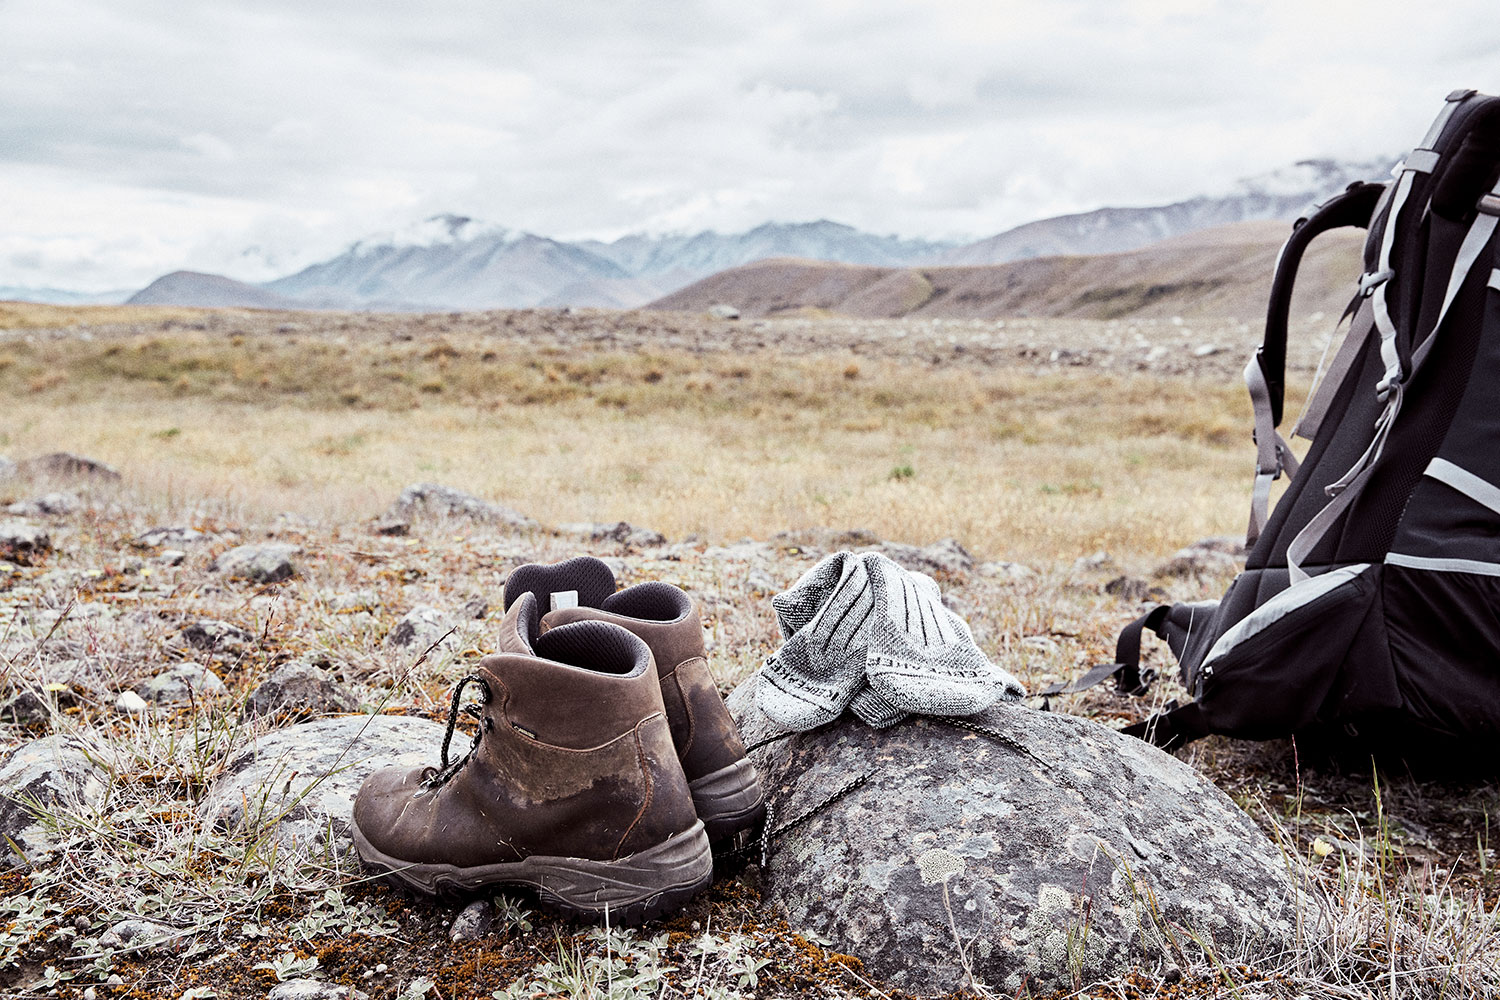 icebreaker hiking socks laying on a rock next to hiking boots and a tramping pack